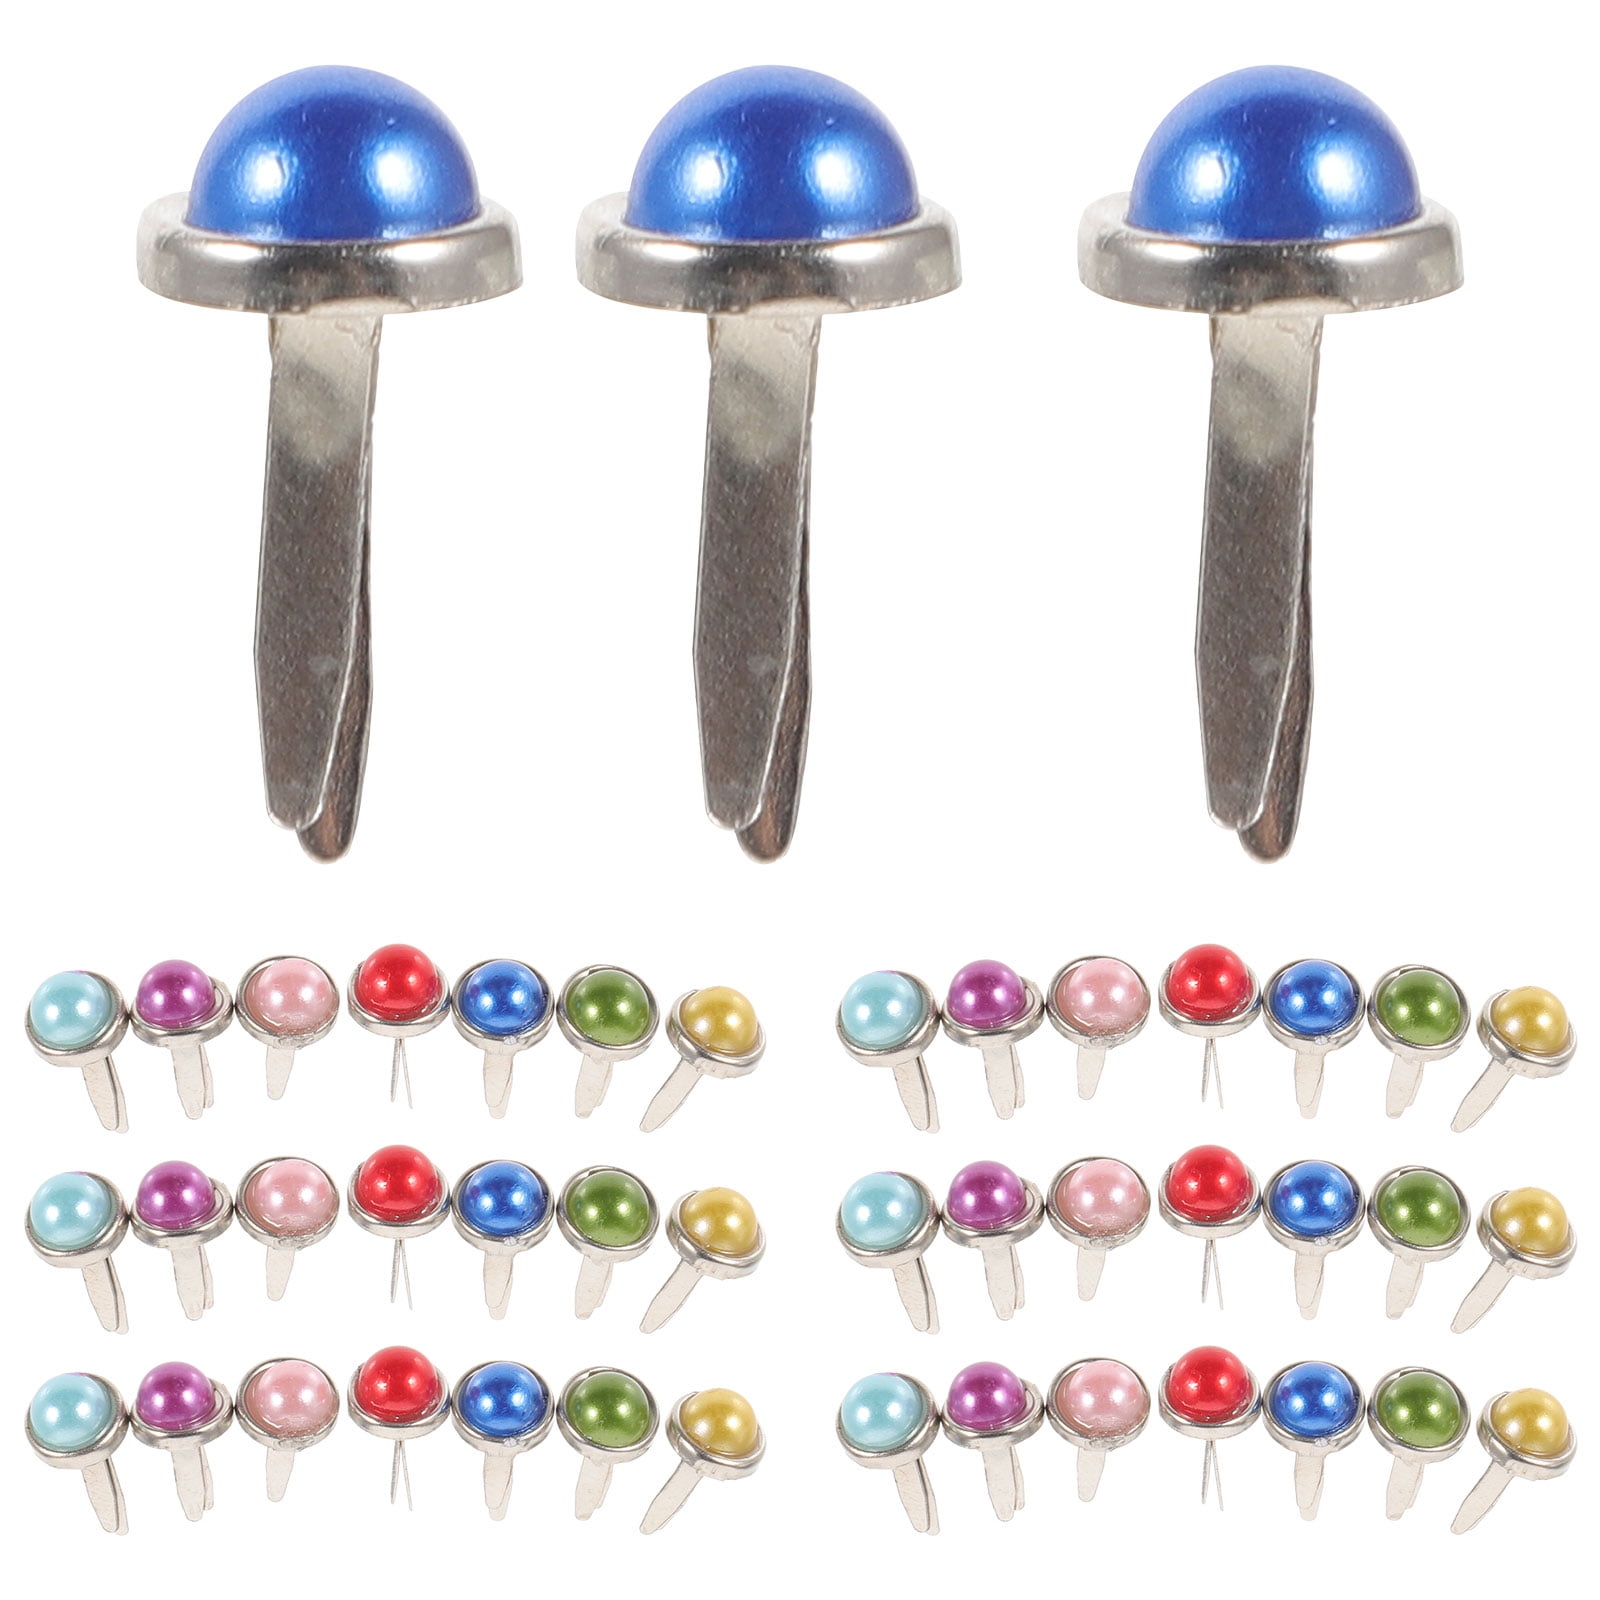 50pcs Mini Brads Metal Pearl Brads Paper Fasteners for Scrapbooking Crafts Making Stamping and DIY - 6x13mm (Assorted Colors), Multicolor